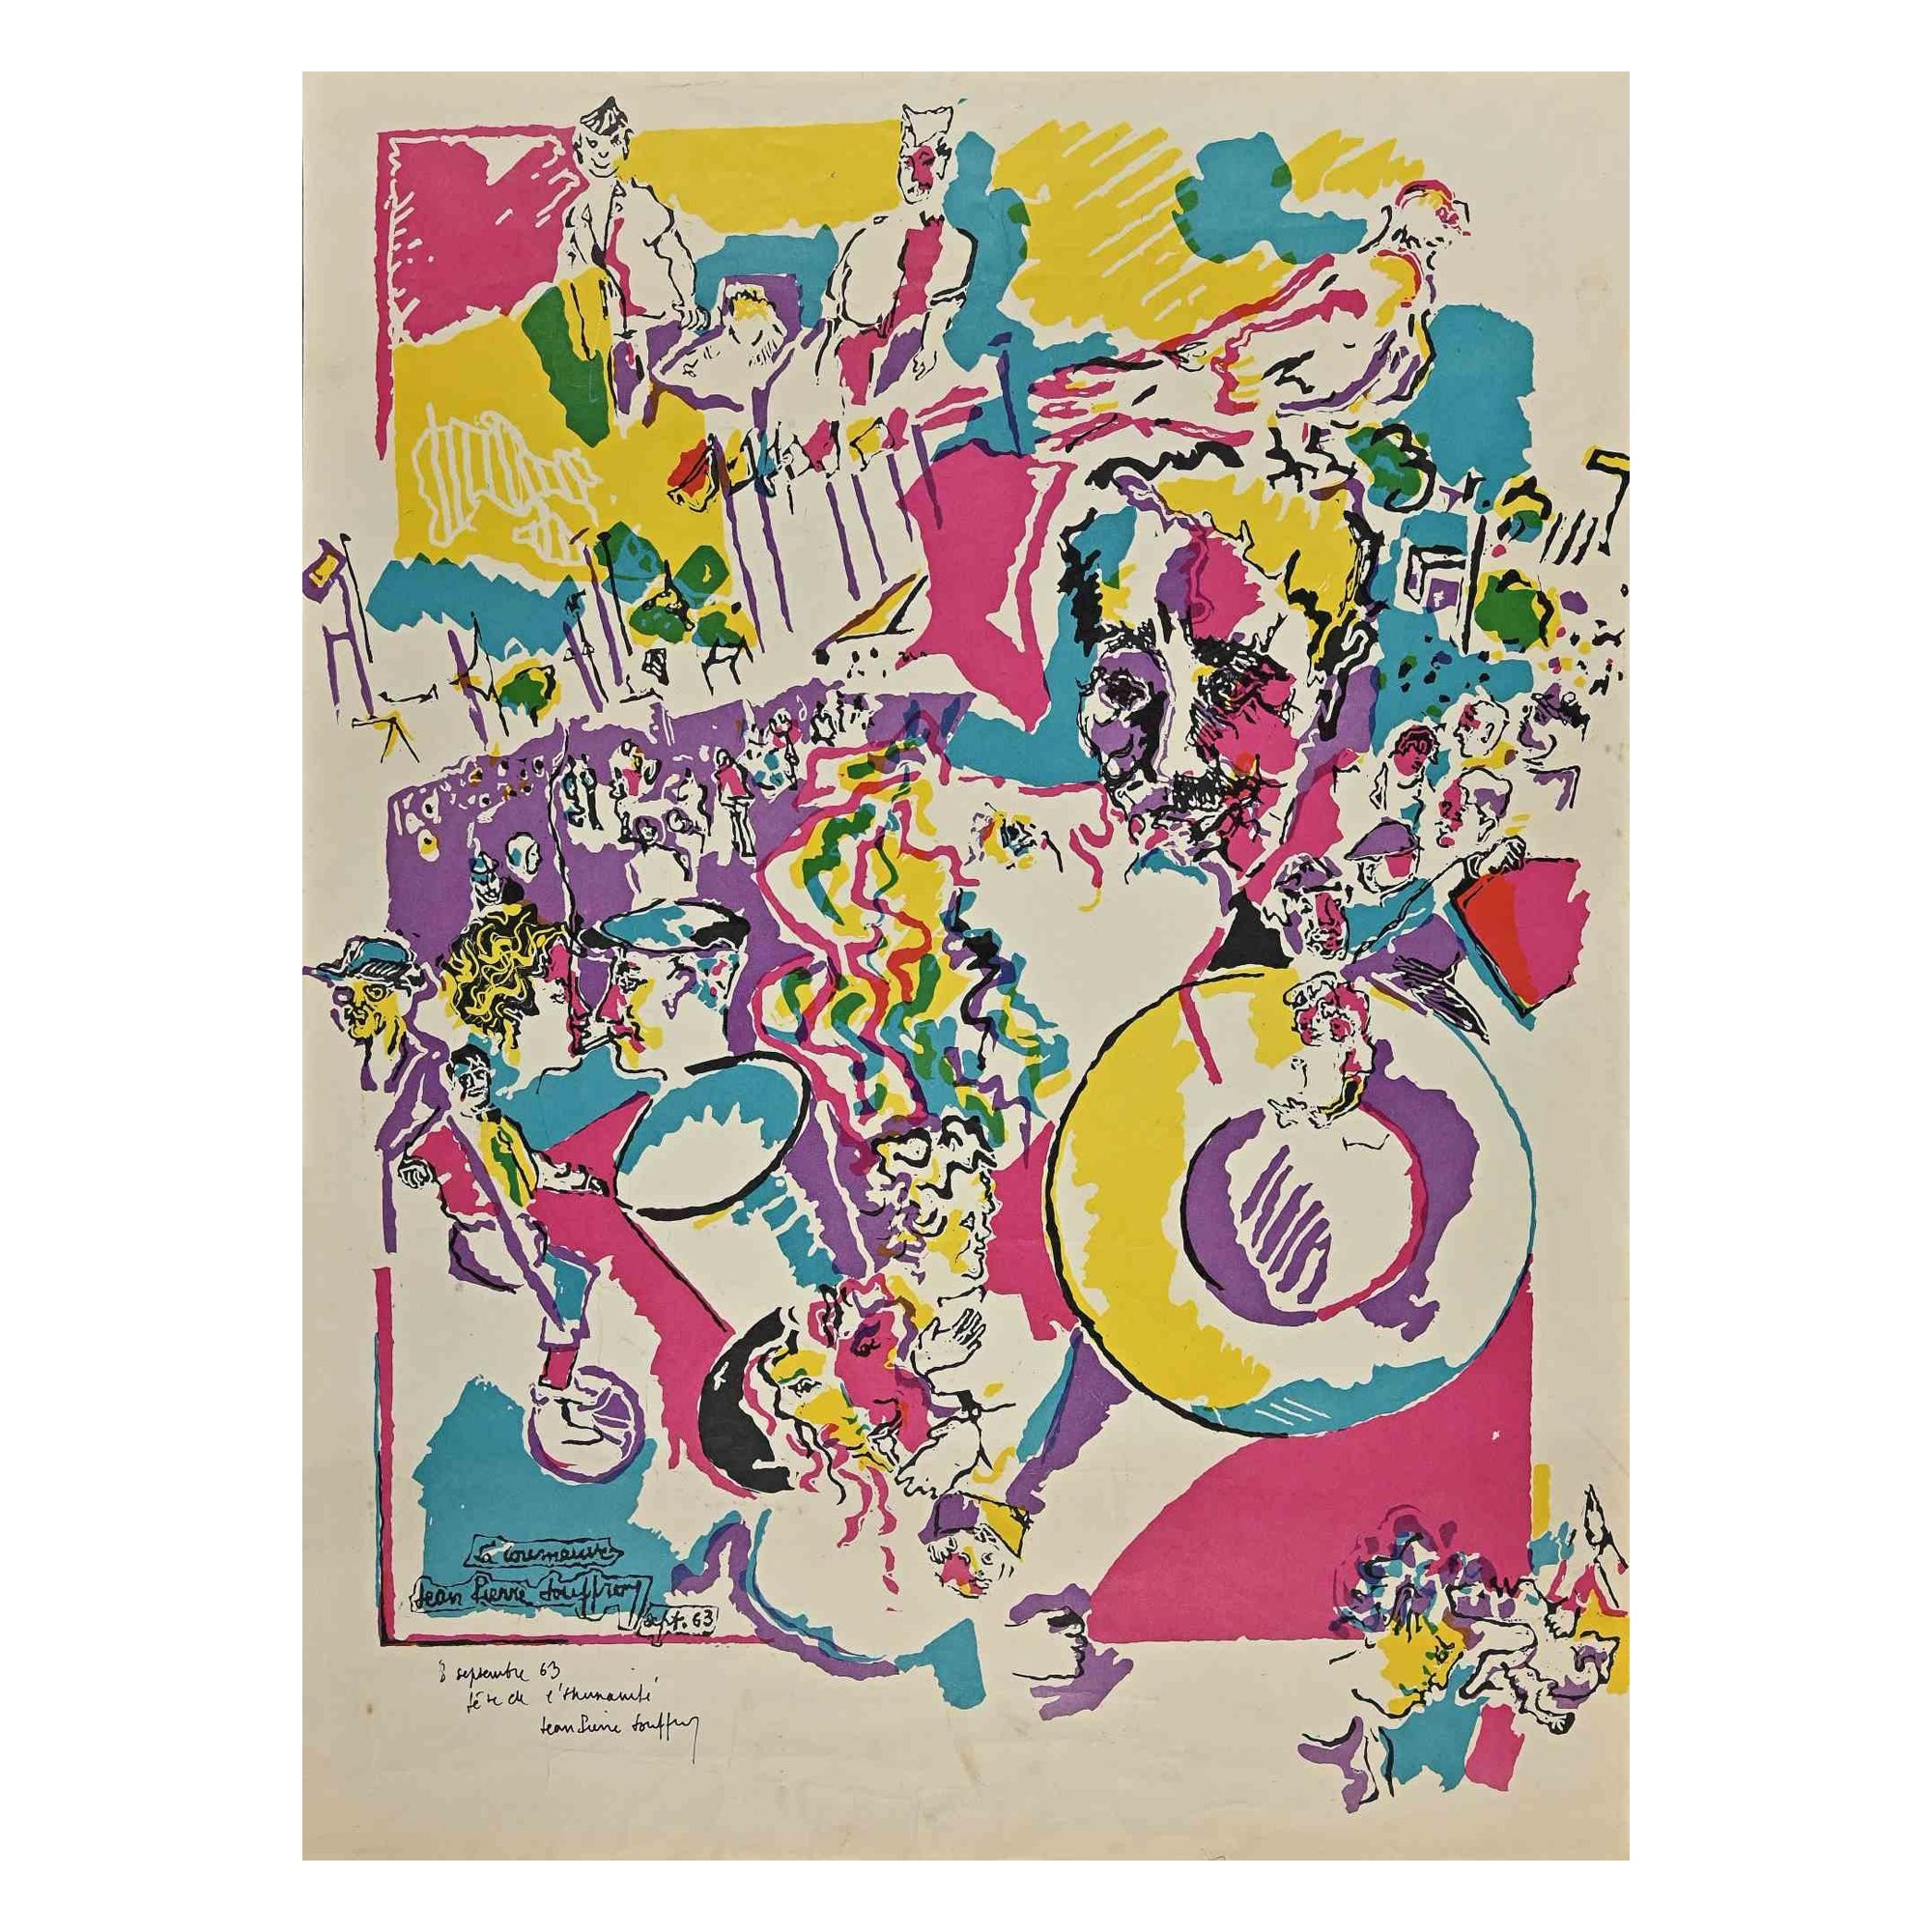 Composition is an Original Lithograph realized by Jean-Pierre Jouffroy in 1963.

Good condition on a yellowed paper.

Signed, titled and dated by the artist on the lower left corner.

Jean-Pierre Jouffroy , born on April 20 , 1933 in Paris and died